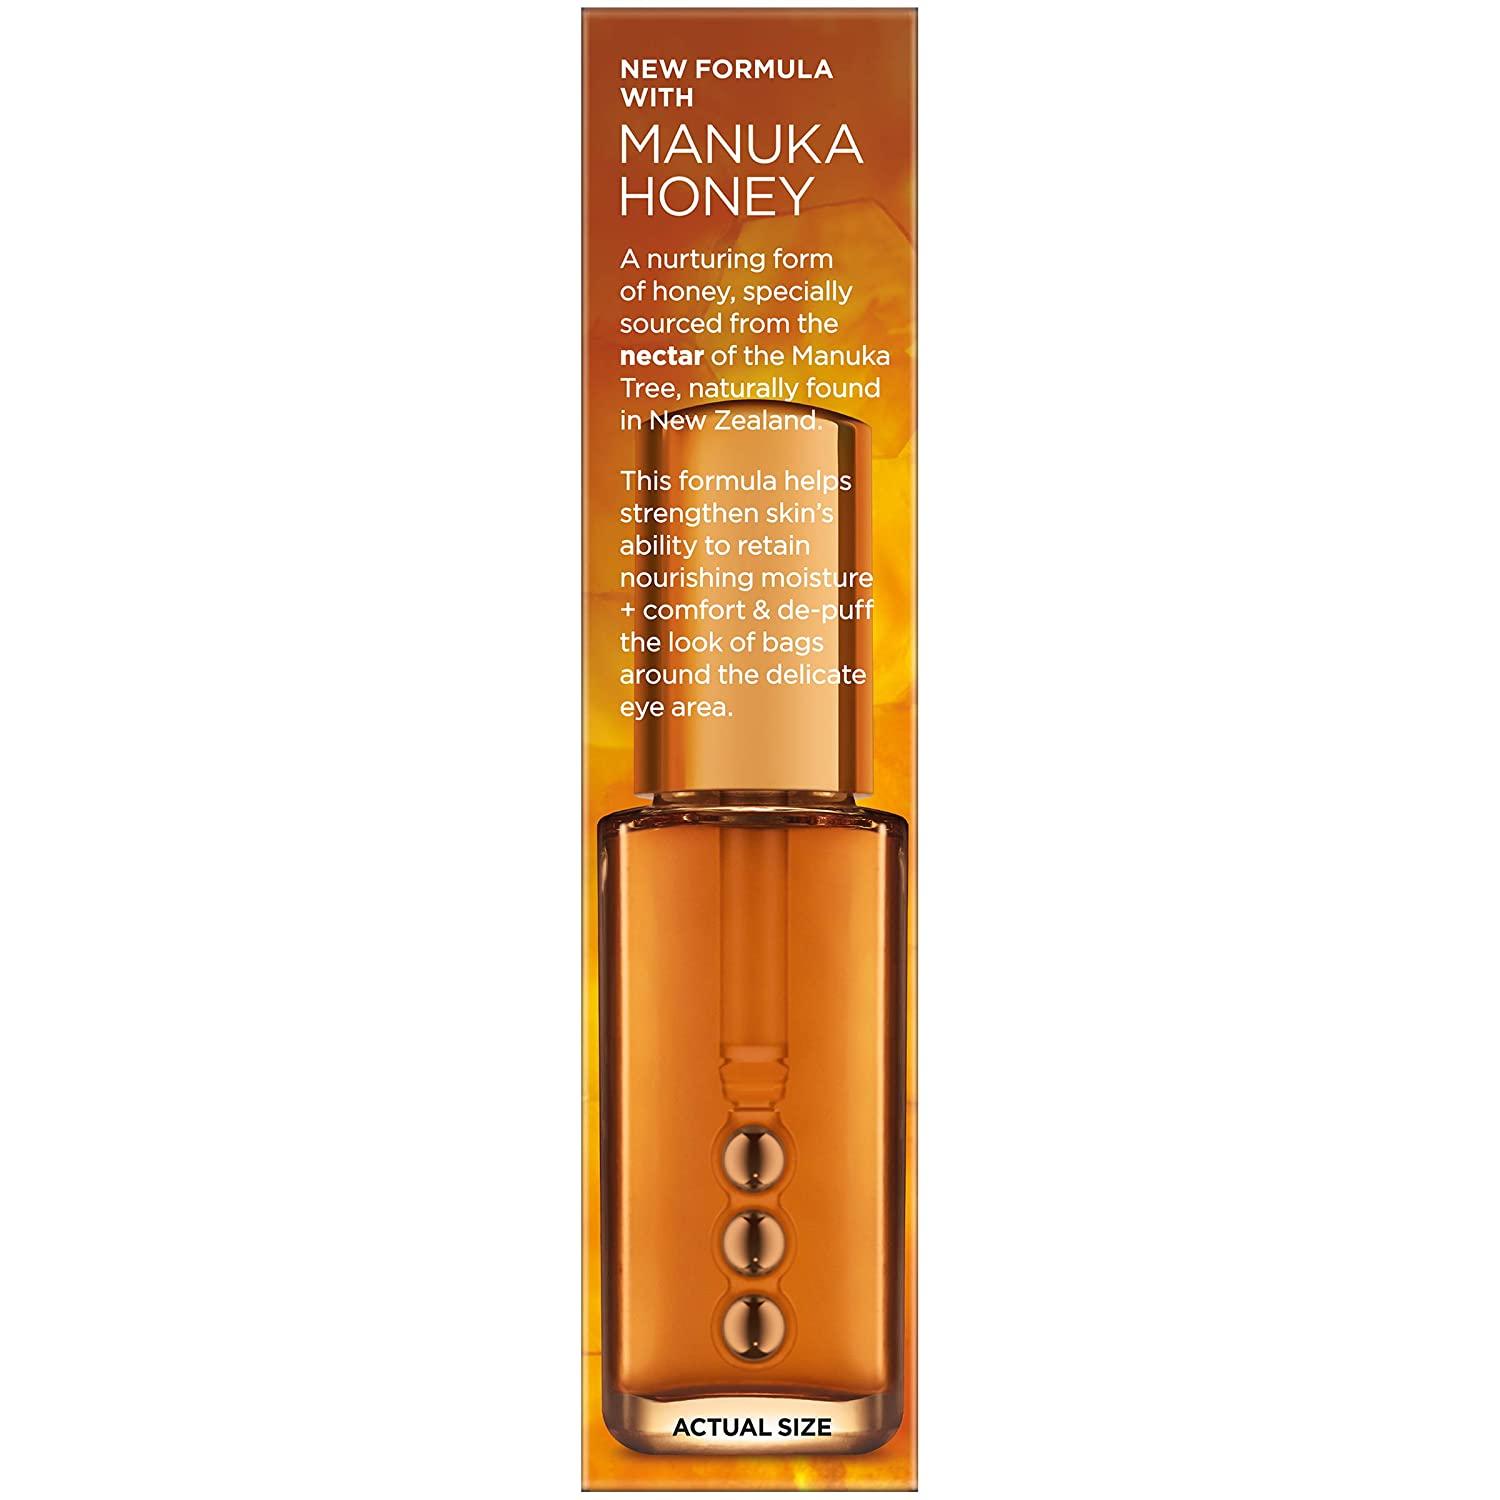 L'Oreal Paris Skincare Age Perfect Hydra Nutrition Eye Gel with Manuka  Honey and Nurturing Oils, Eye Treatment Gel for Dry Skin, de-puffing  rollerballs to Reduce Puffy Eyes, Paraben Free, 0.5 fl. oz.